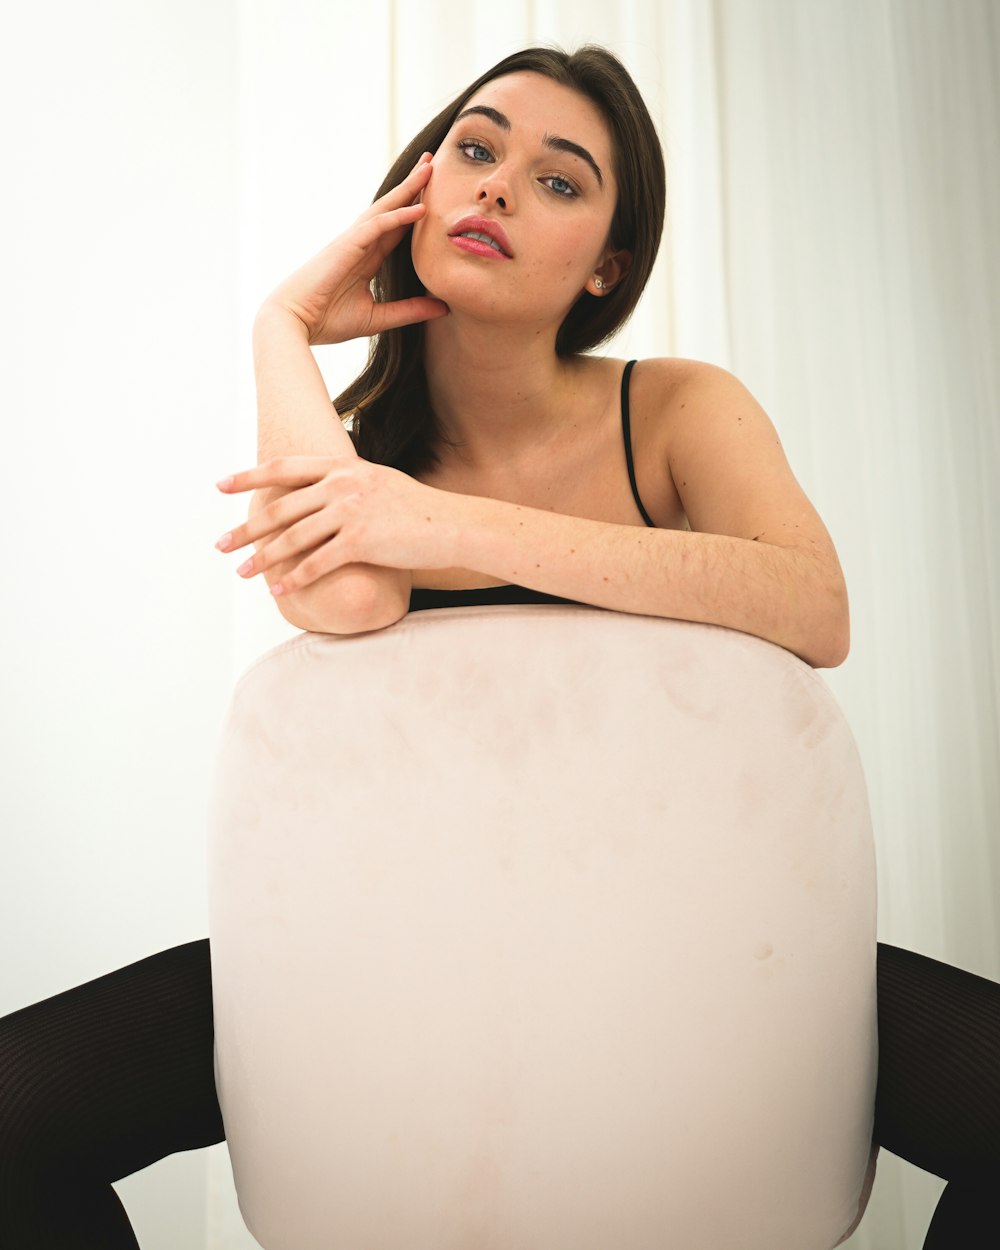 a woman sitting on top of a white object